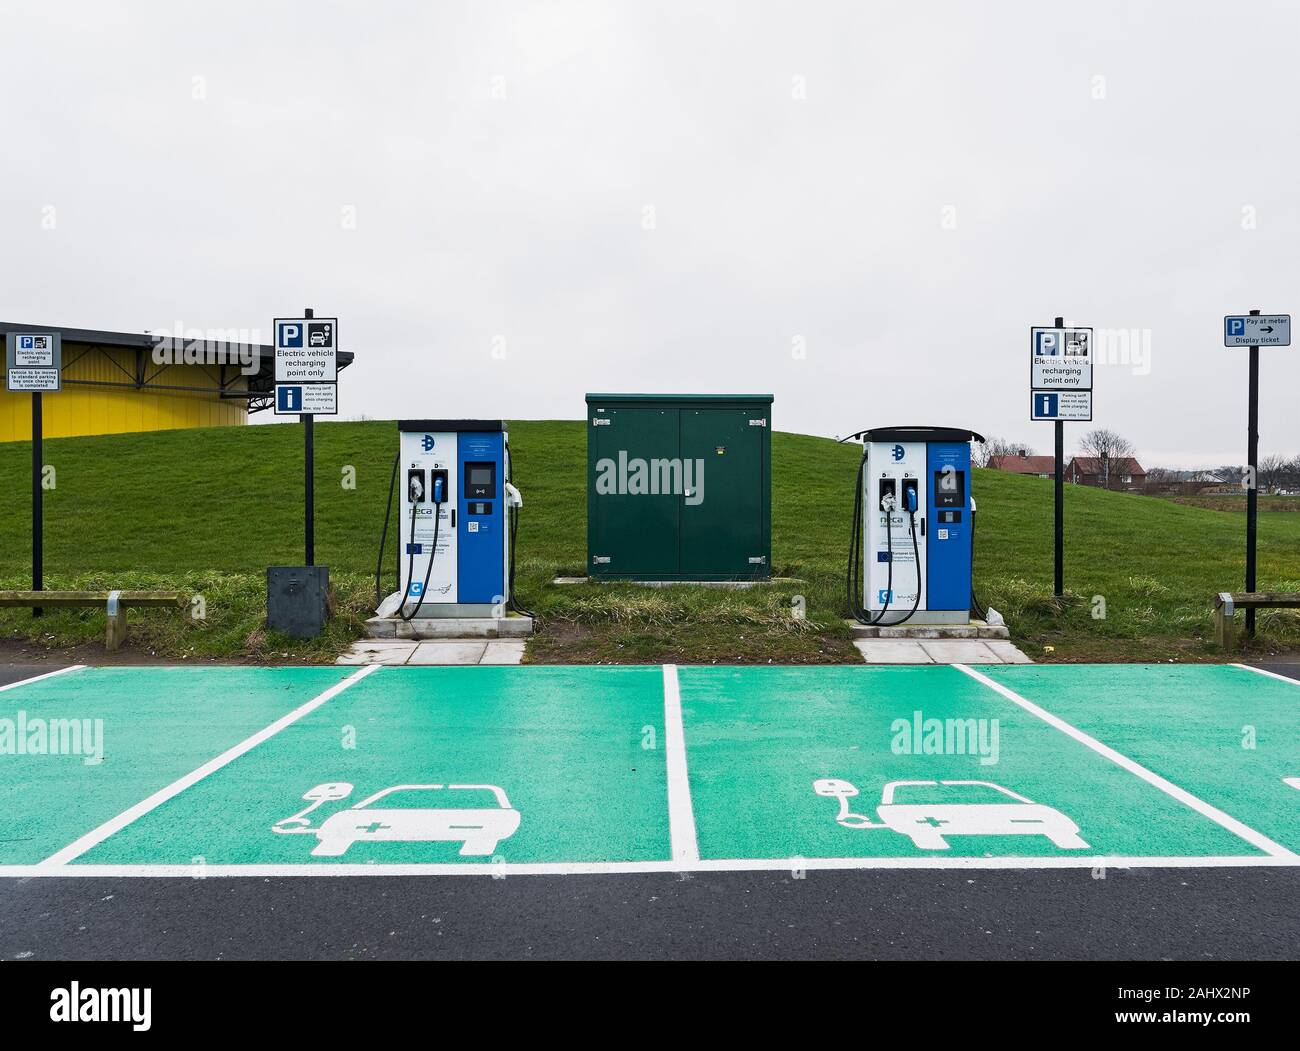 Electric Vehicle Charging Bay High Resolution Stock Photography and